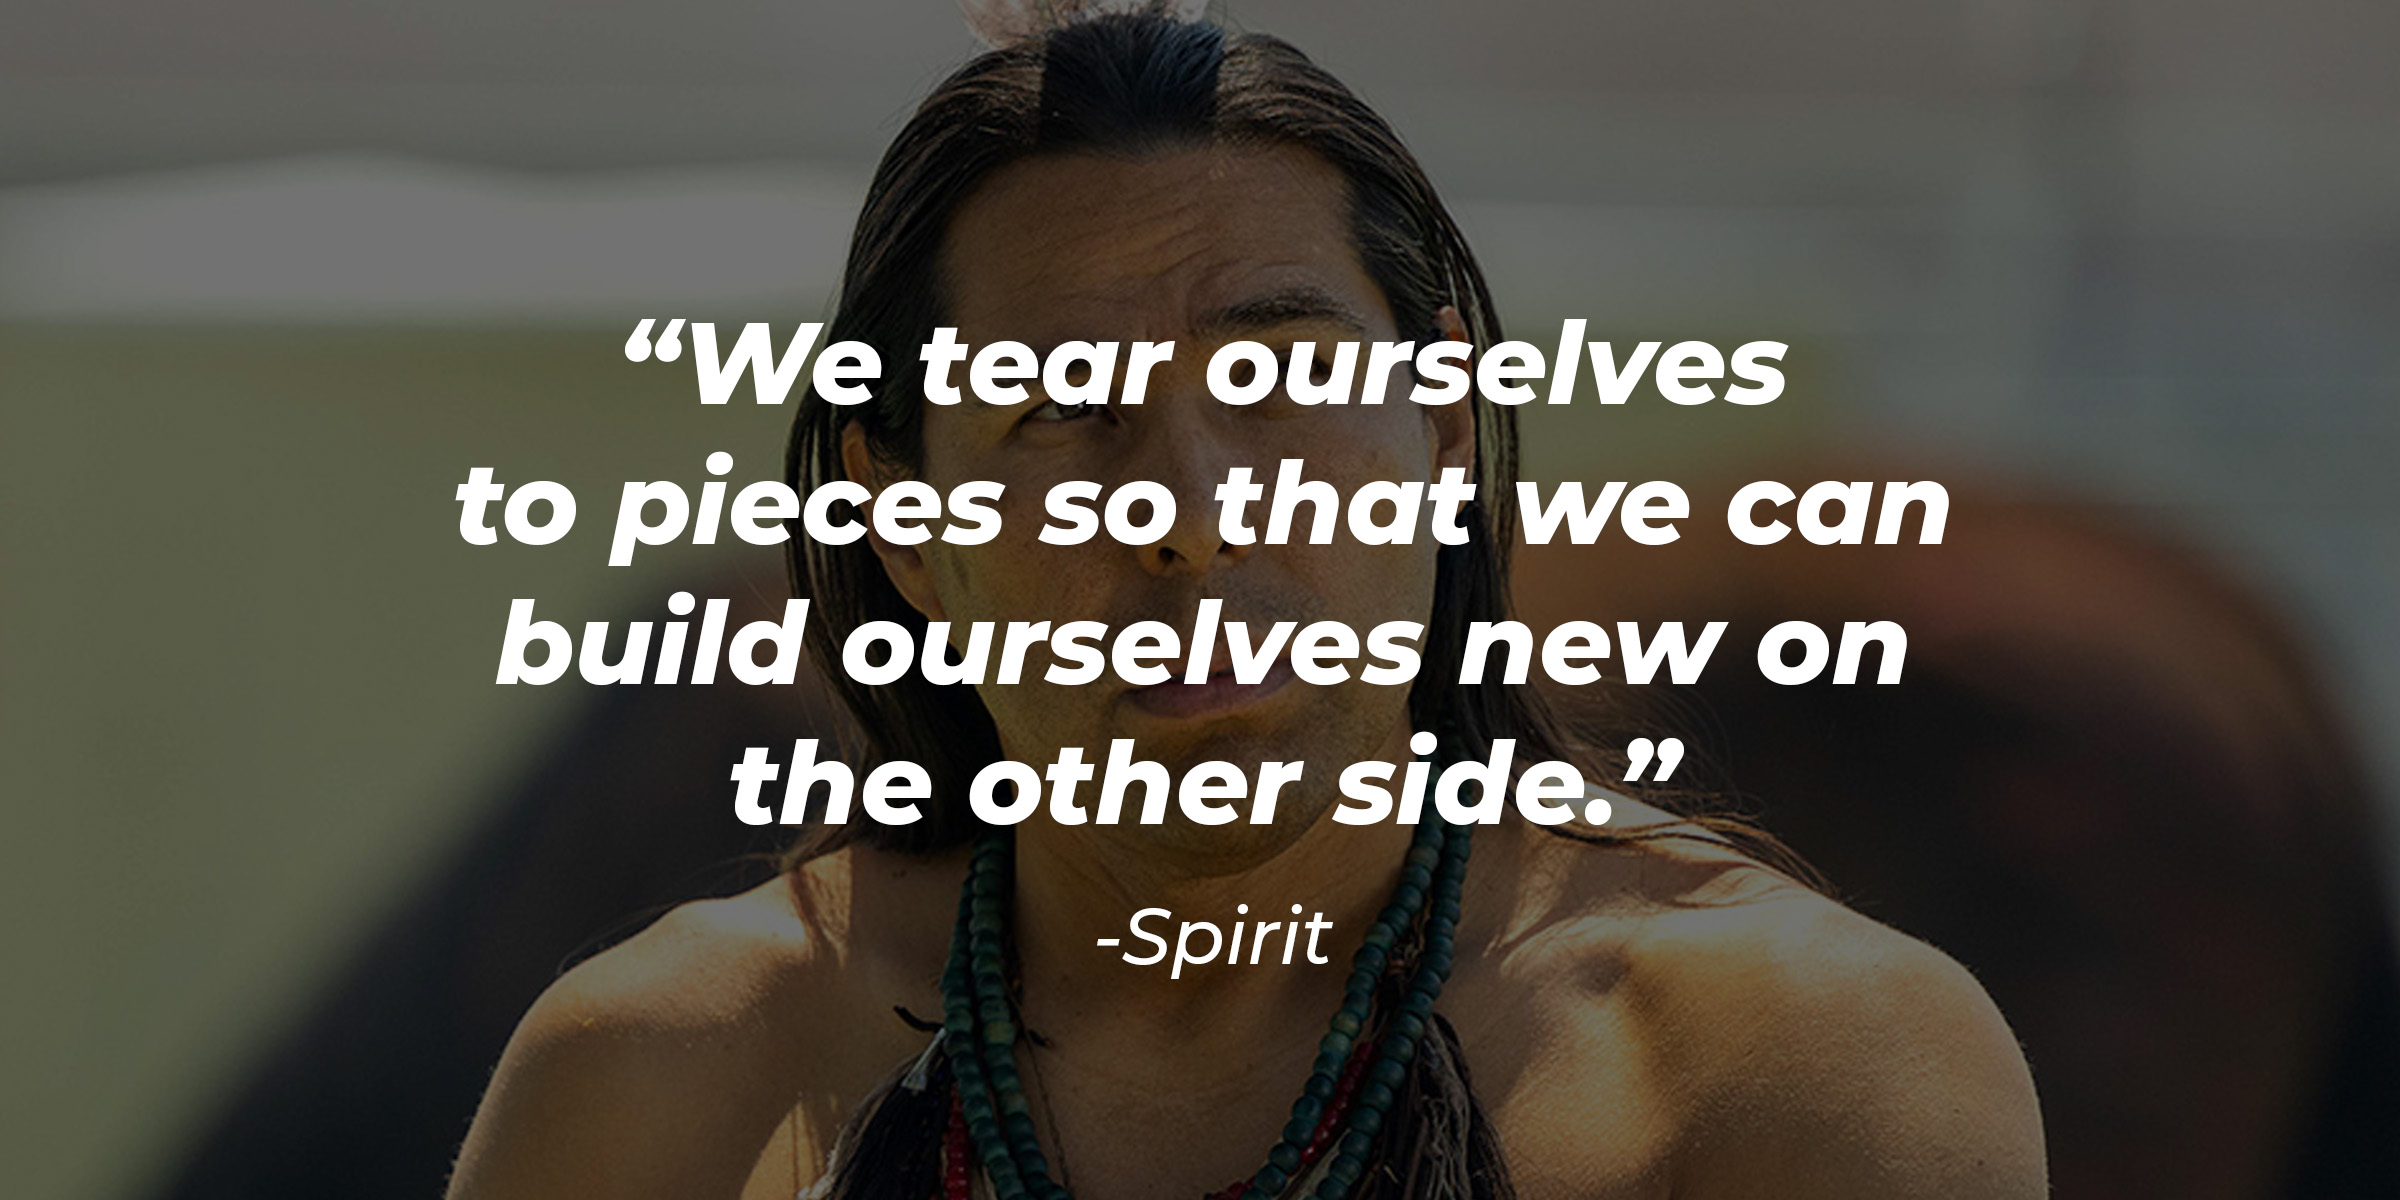 Spirit, with his quote: “We tear ourselves to pieces so that we can build ourselves new on the other side.” | Source: Facebook.com/RezDogsFX